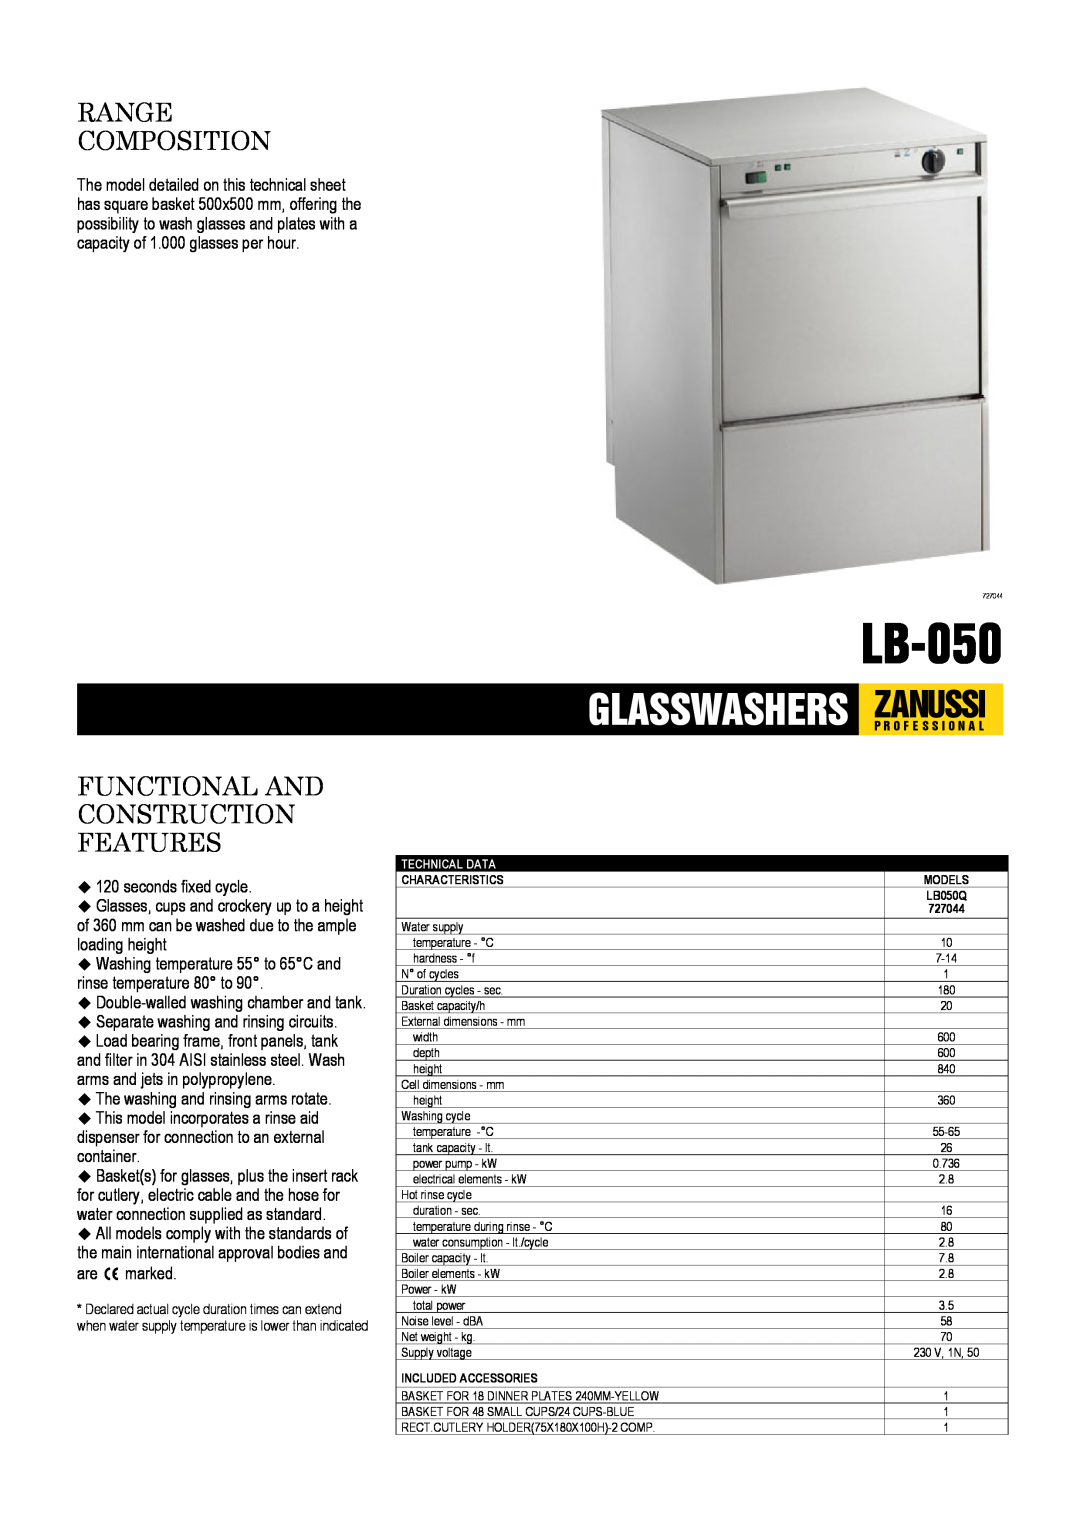 Zanussi LB-050, 727044, LB050Q dimensions Range Composition, Functional And Construction Features, seconds fixed cycle 